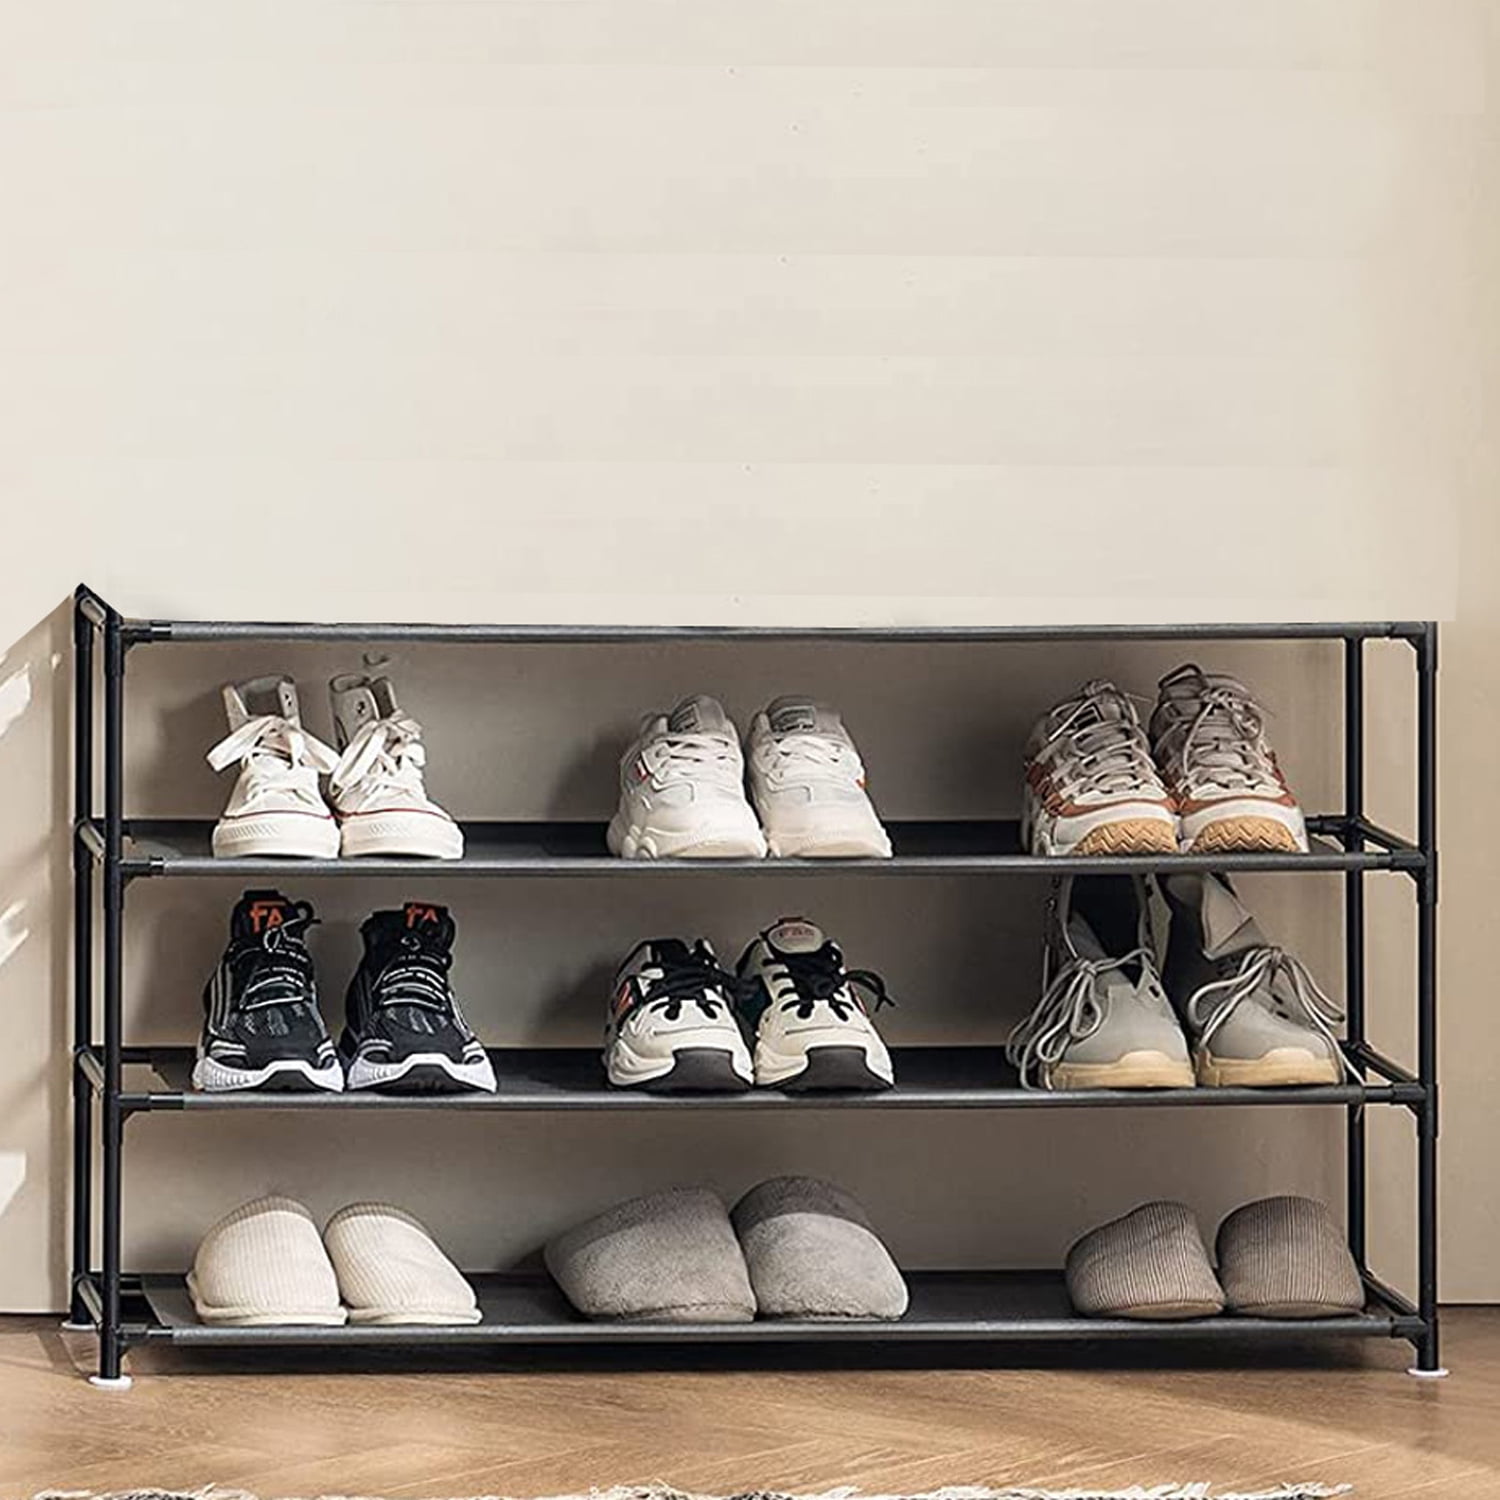 GUANJUNE 4 Tier Extendable Shoe Rack Organizer,Heavy Duty Metal Shelf  Organize Holds upto 20 Pairs Shoes,Space Saver Rack for Wardrobe